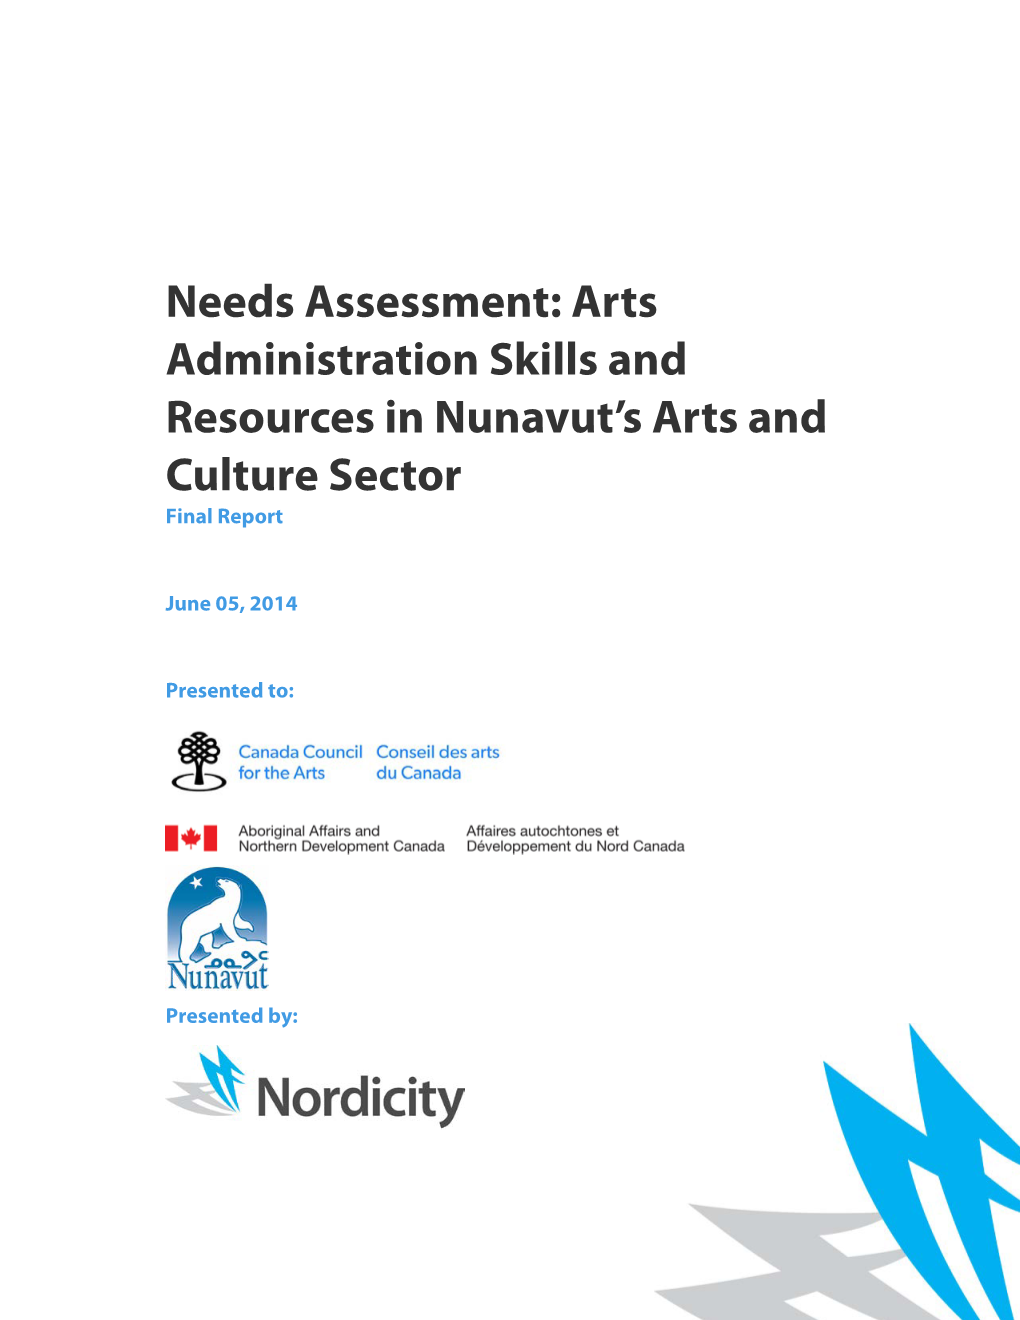 Needs Assessment: Arts Administration Skills and Resources in Nunavut's Arts and Culture Sector